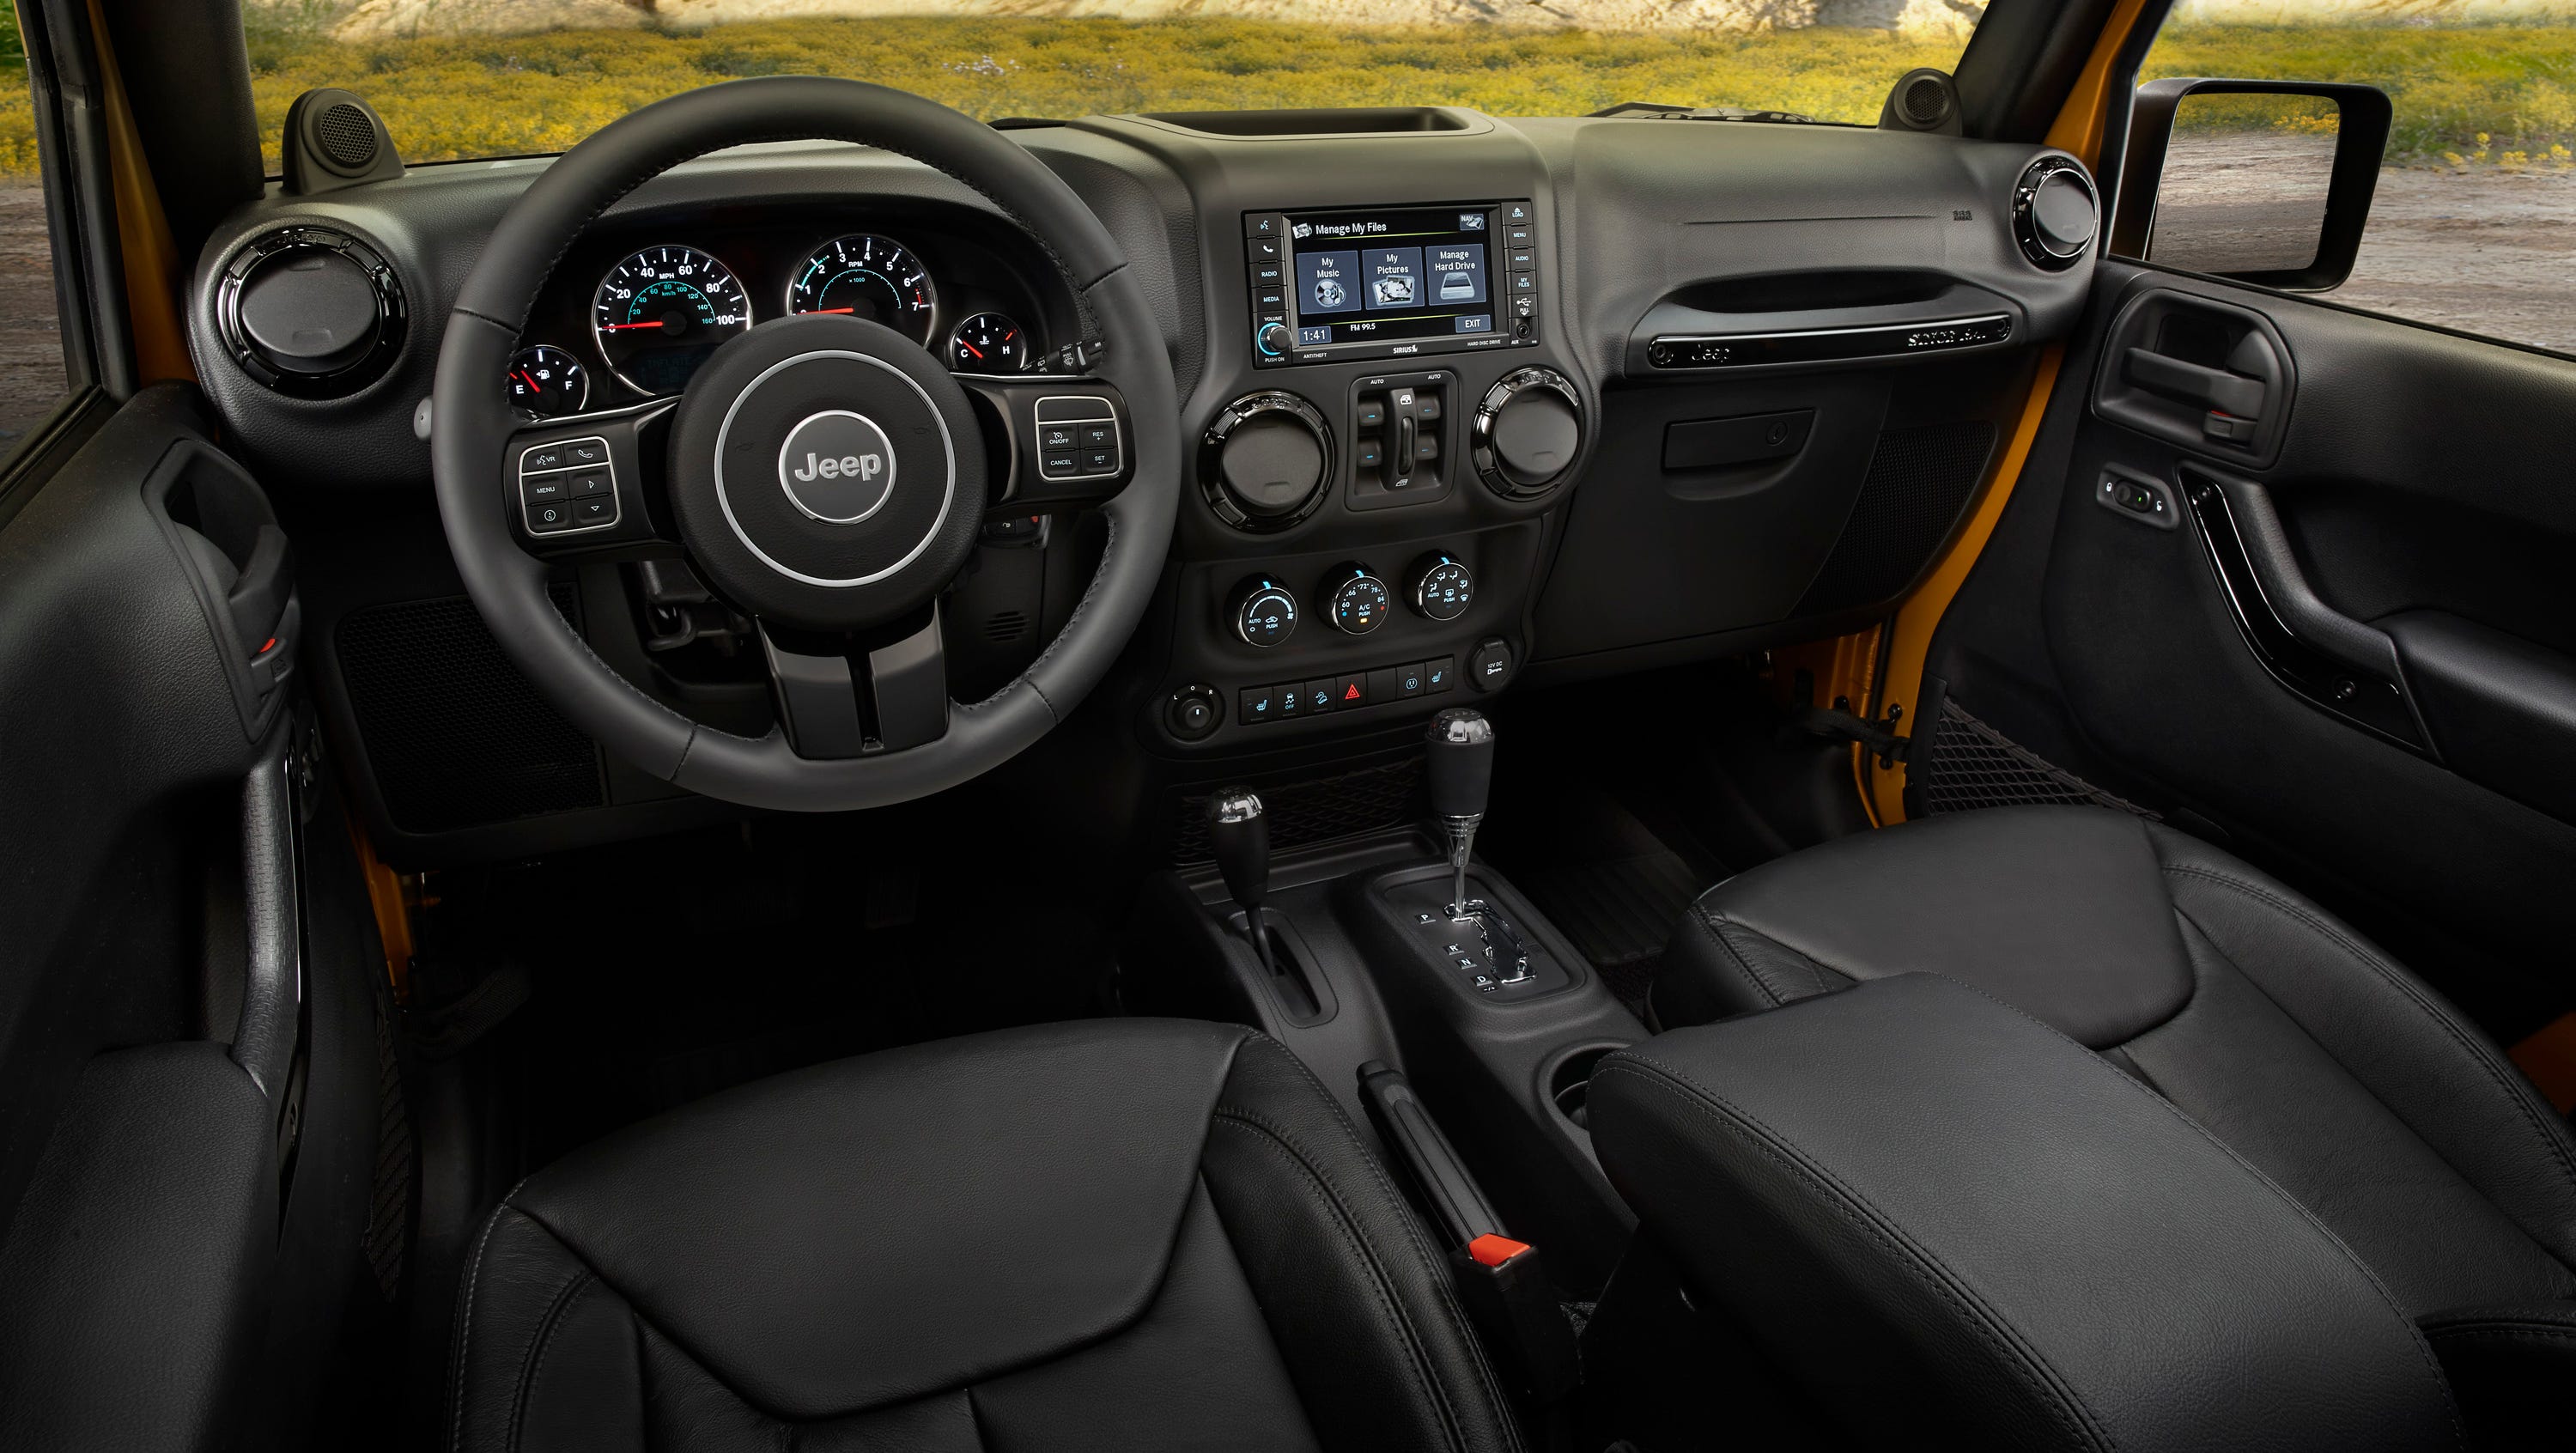 Auto review: 2014 Jeep Wrangler Unlimited is a convertible family car